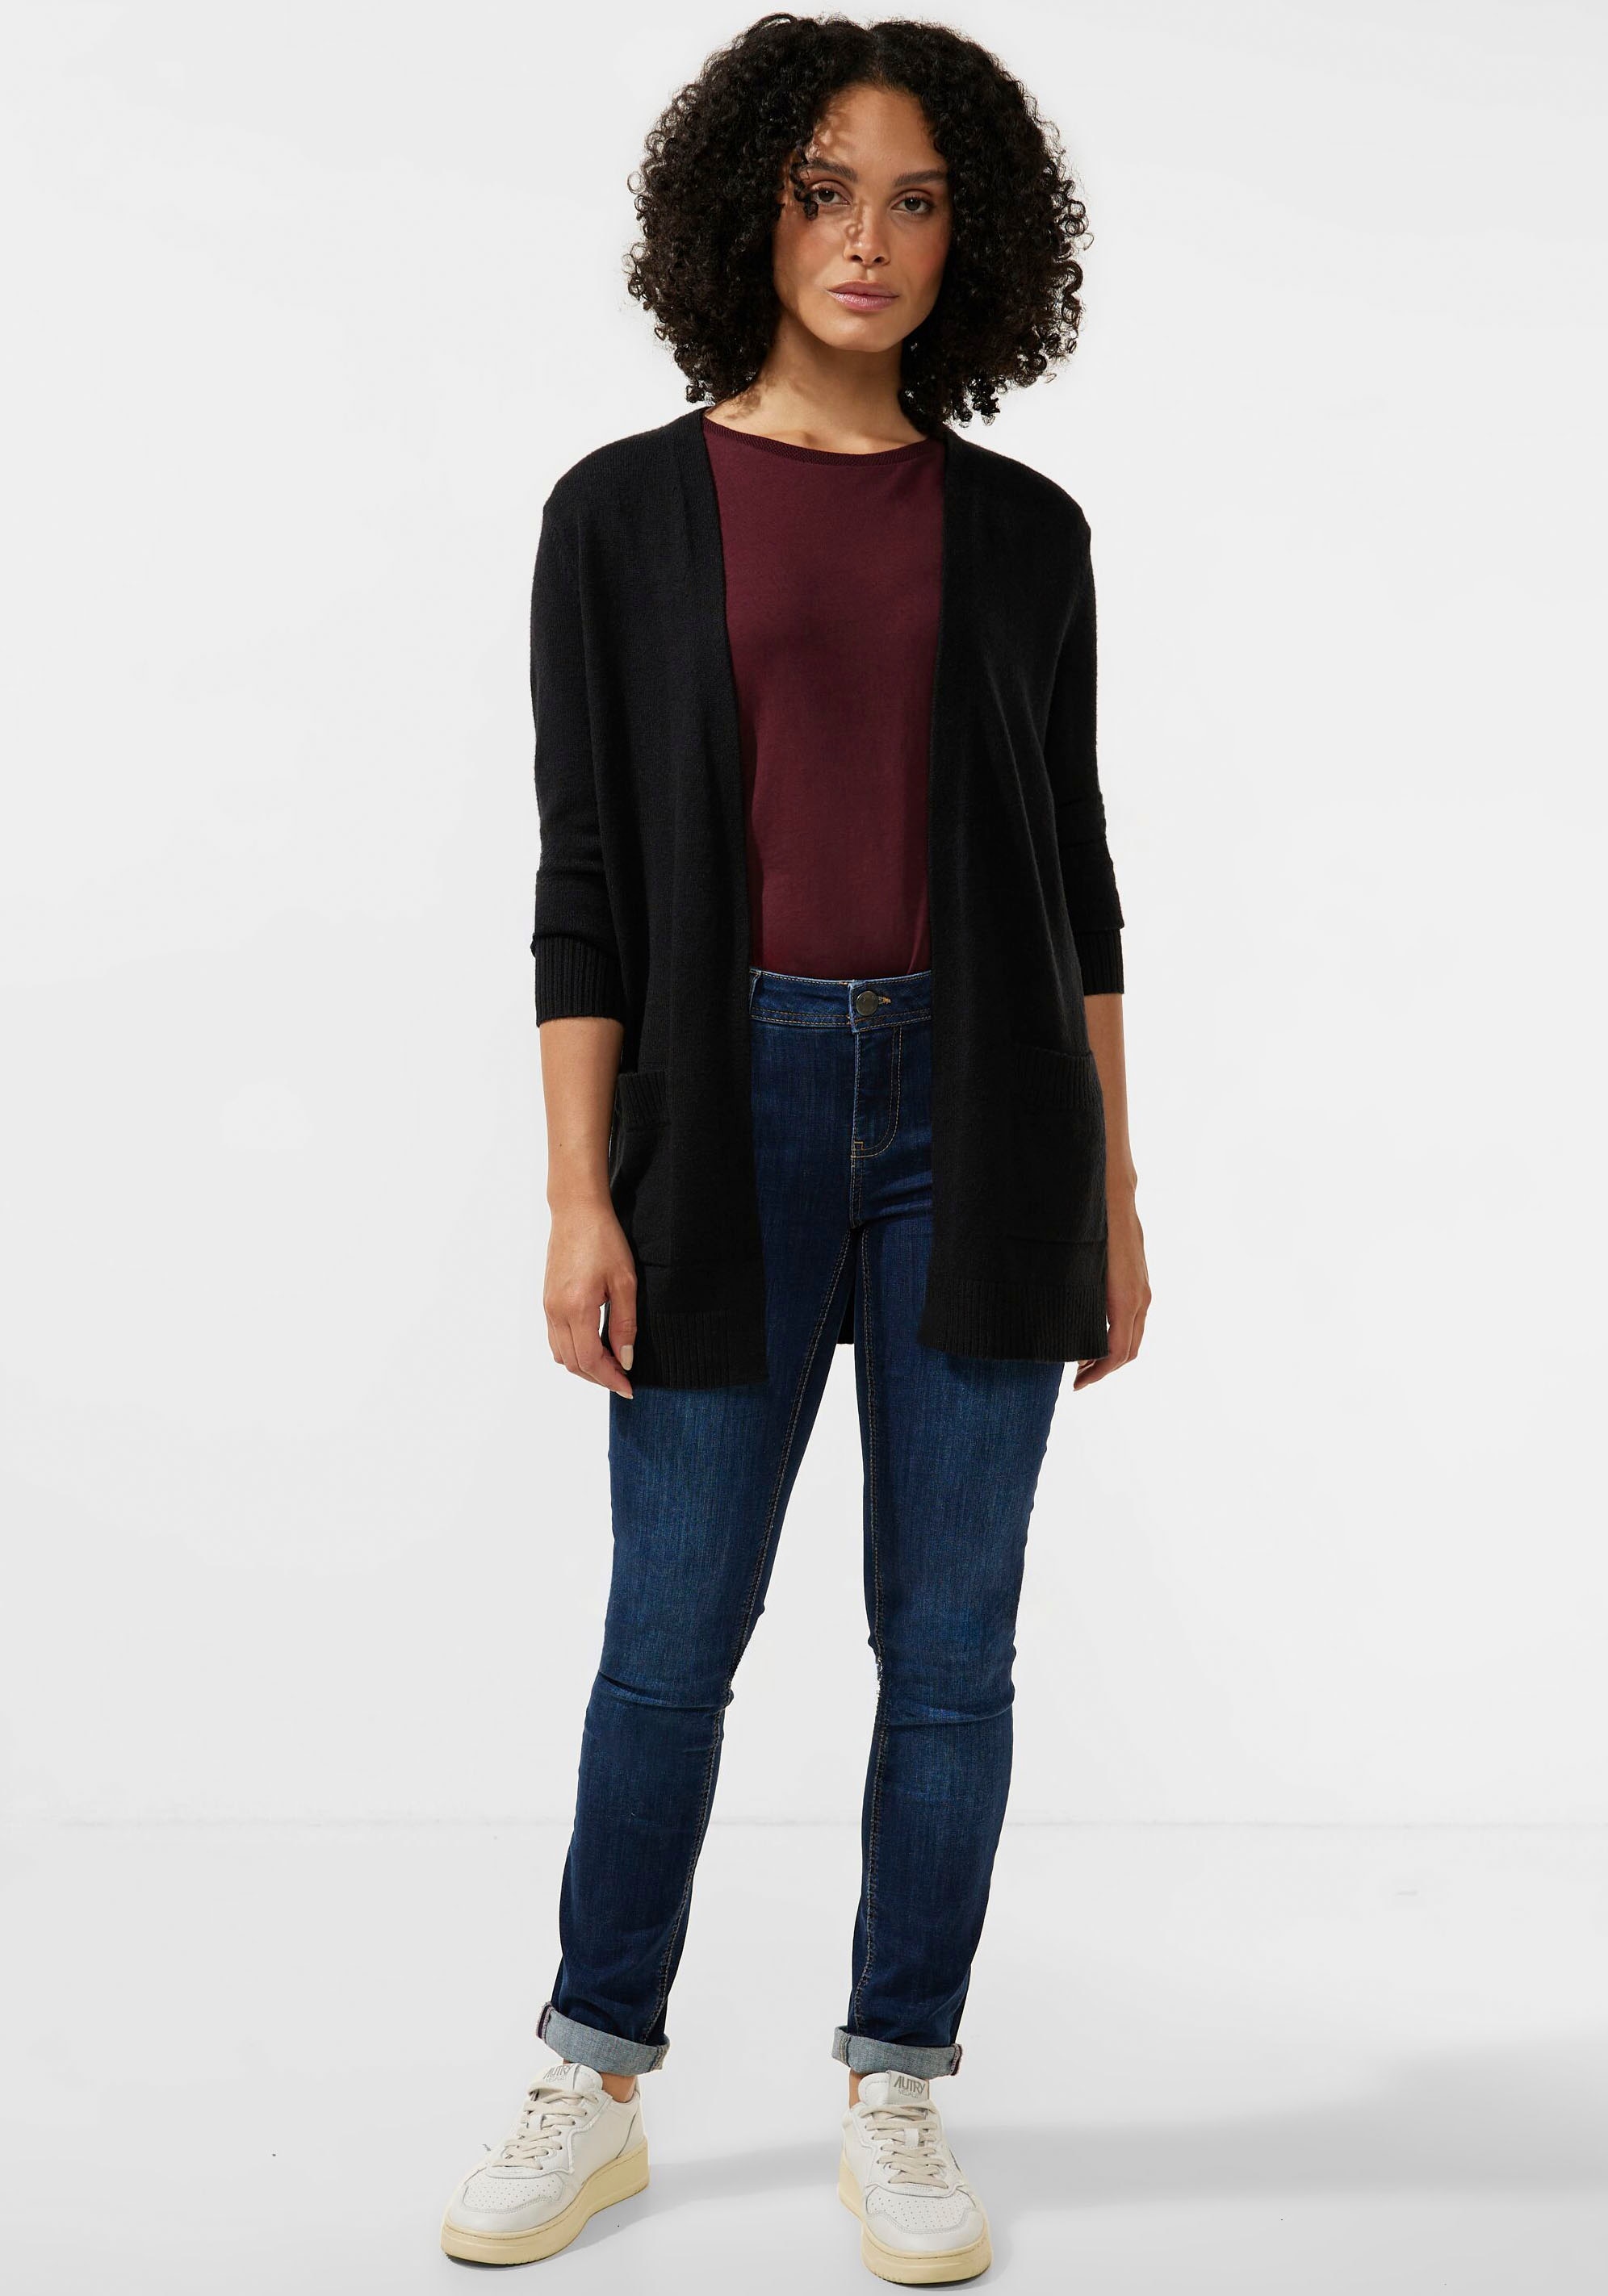 STREET ONE Cardigan, Unifarbe OTTOversand bei in